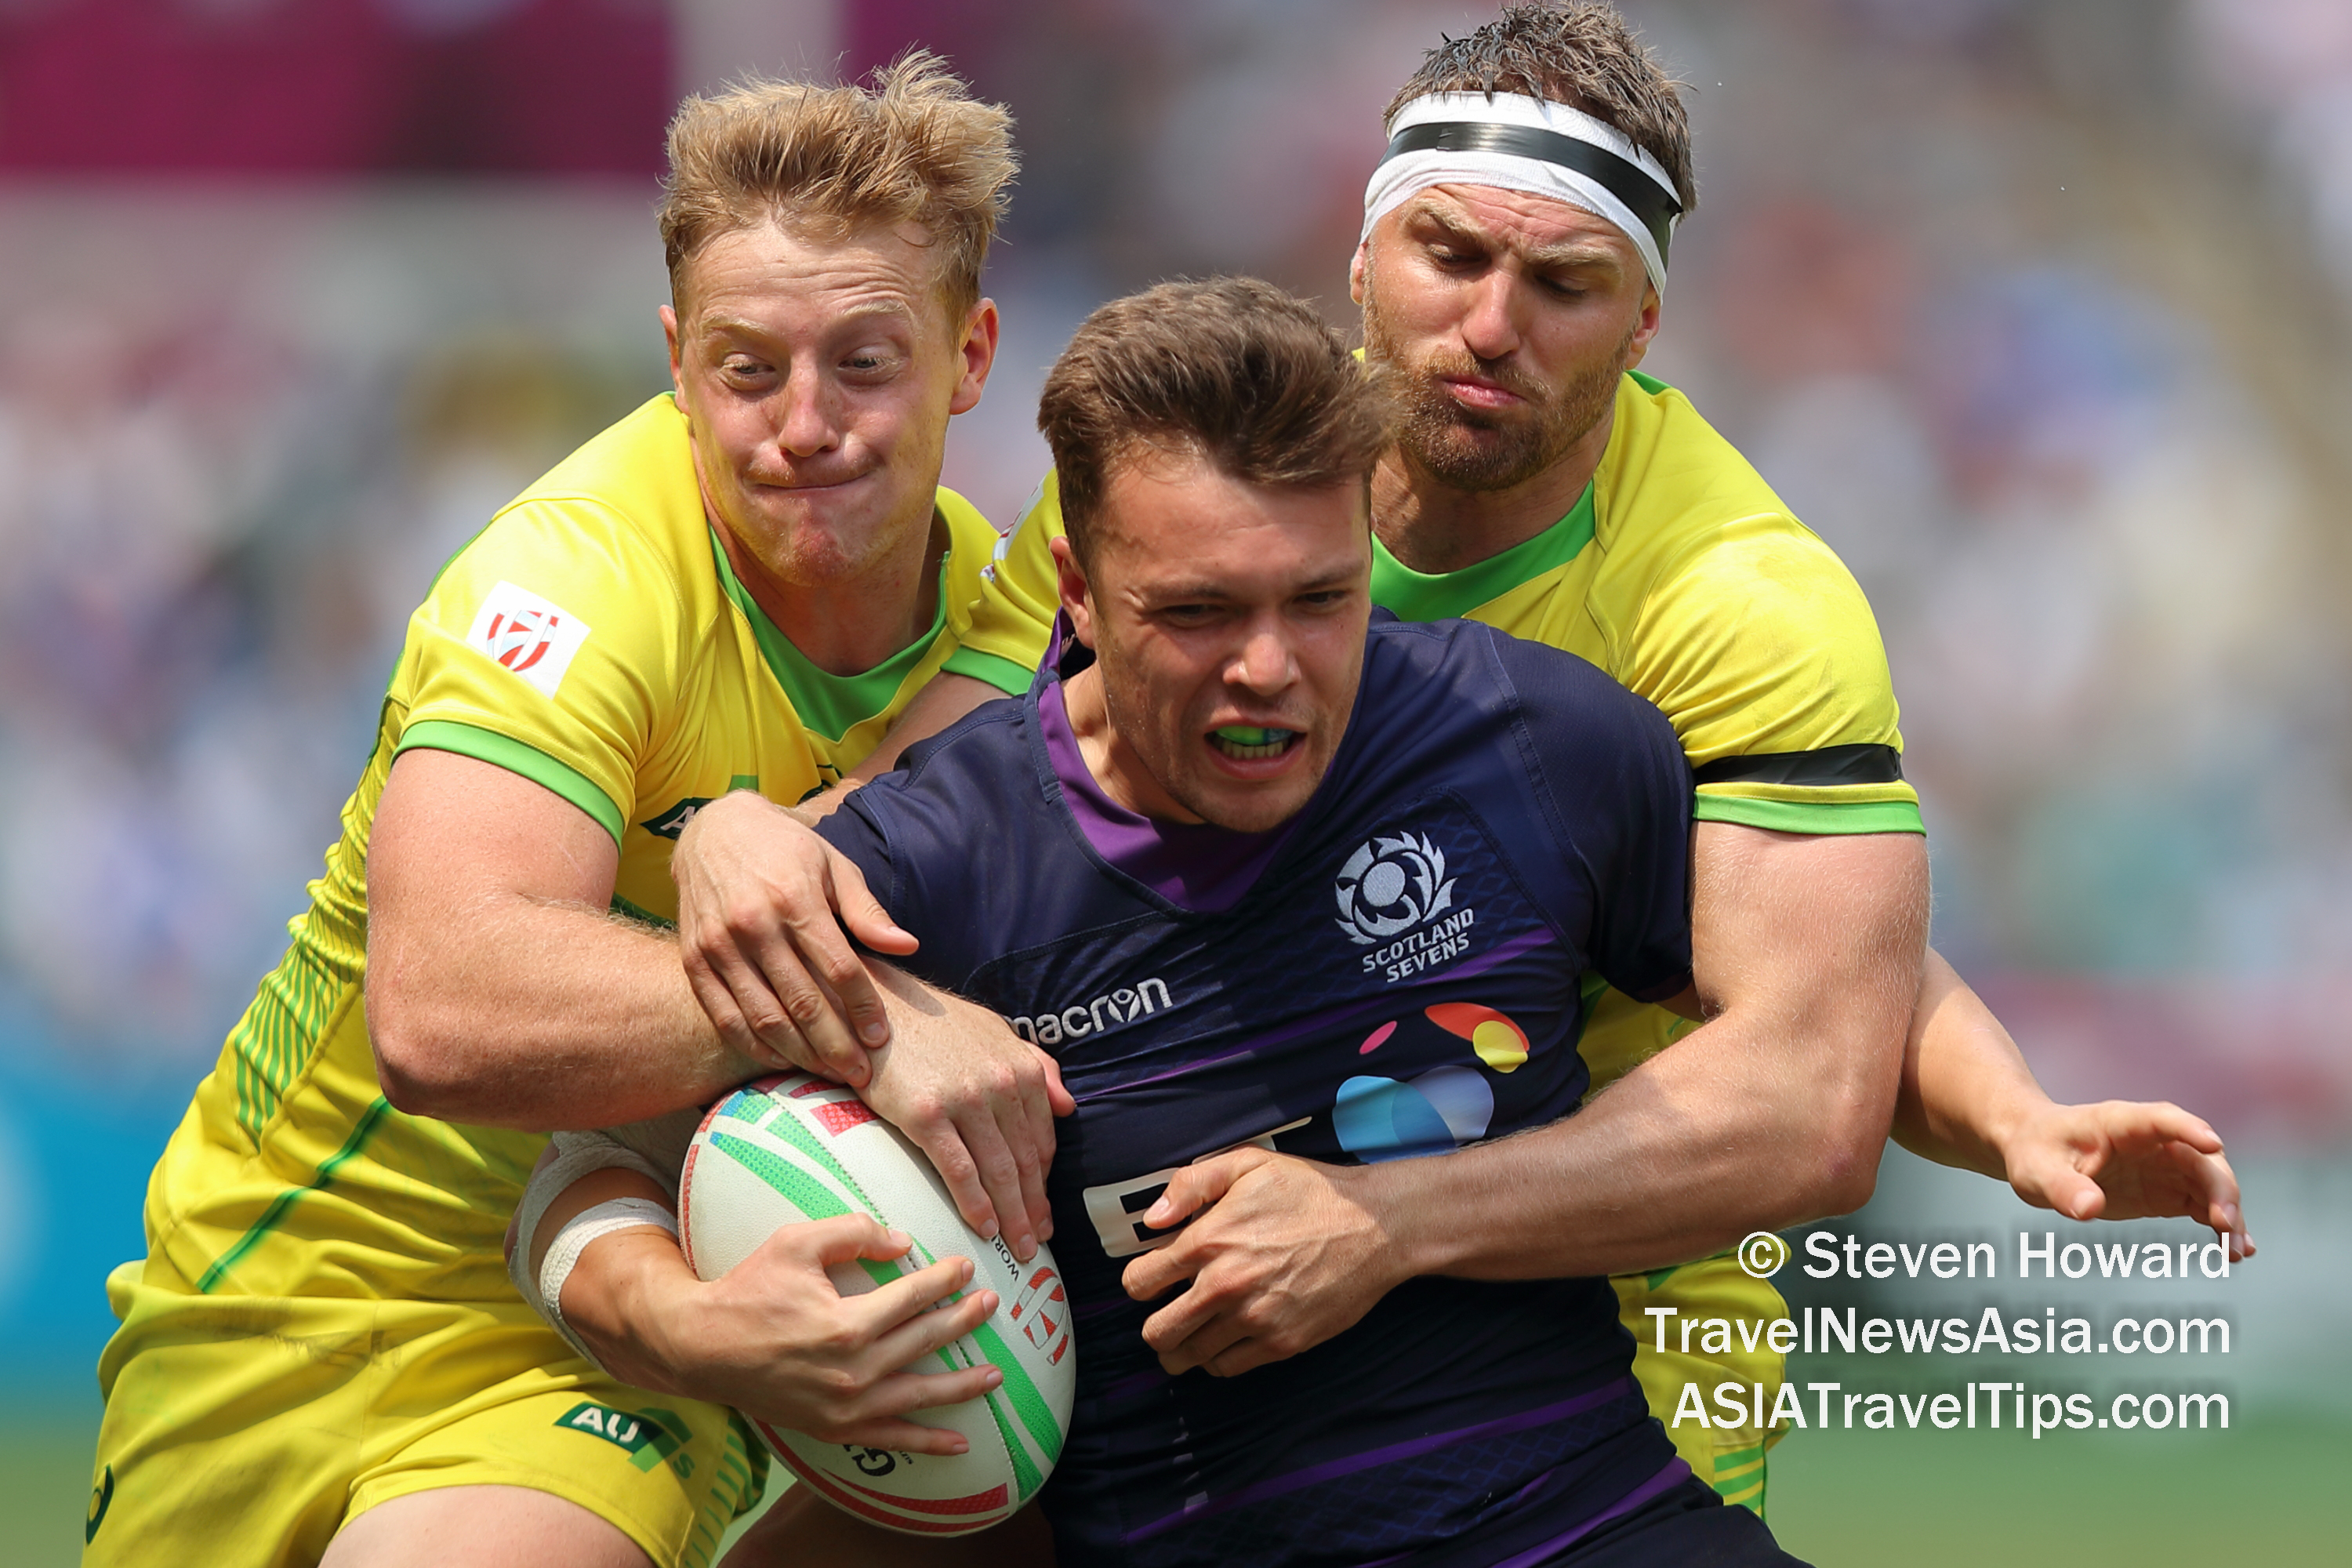 Action between Australia and Scotland during the Cathay Pacific / HSBC Hong Kong Sevens 2019. Picture by Steven Howard of TravelNewsAsia.com Click to enlarge.